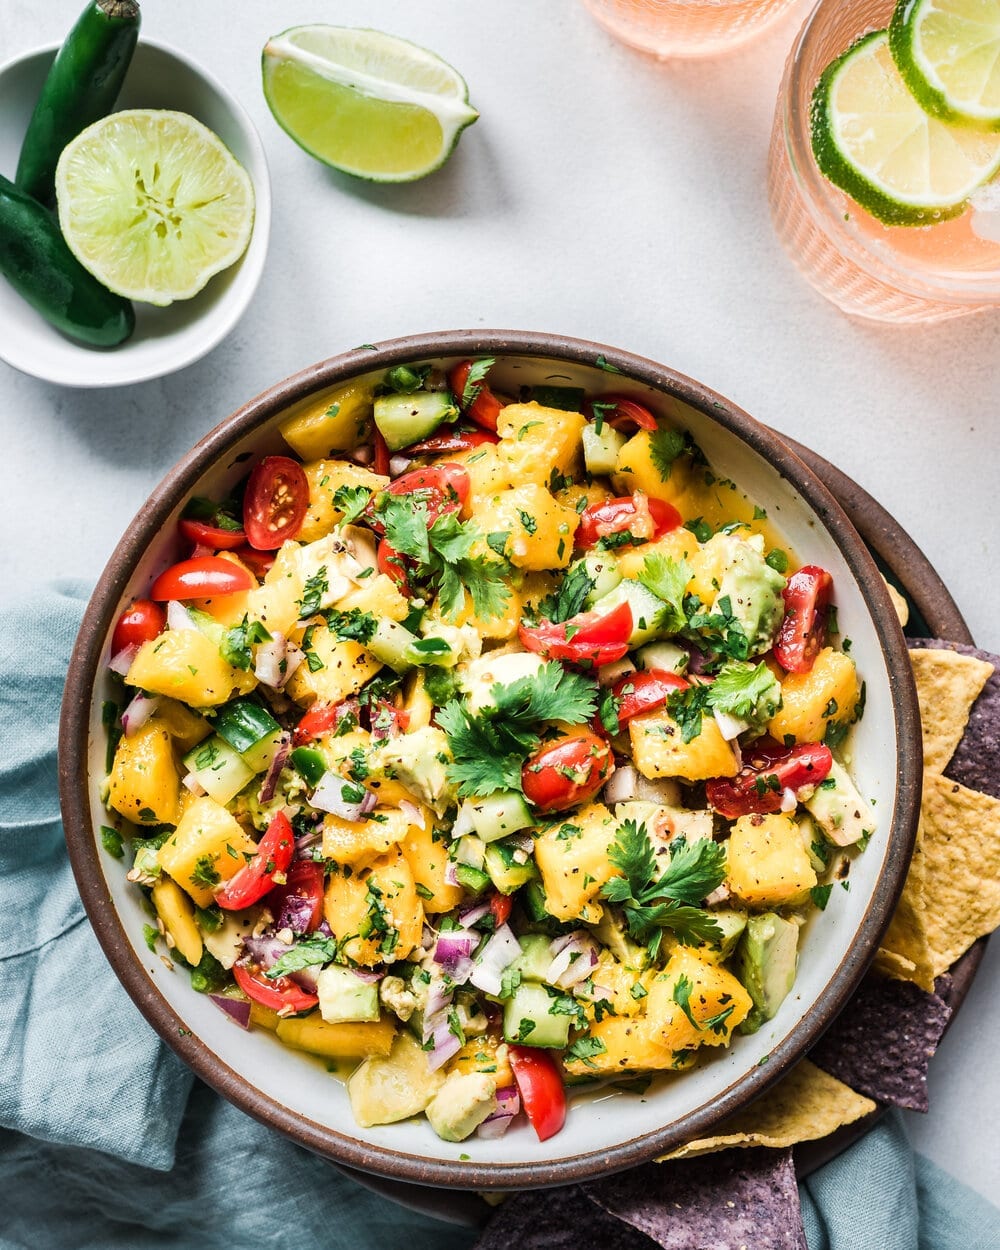 Healthy Recipes With Mango Salsa And Chicken: Zesty Delights!